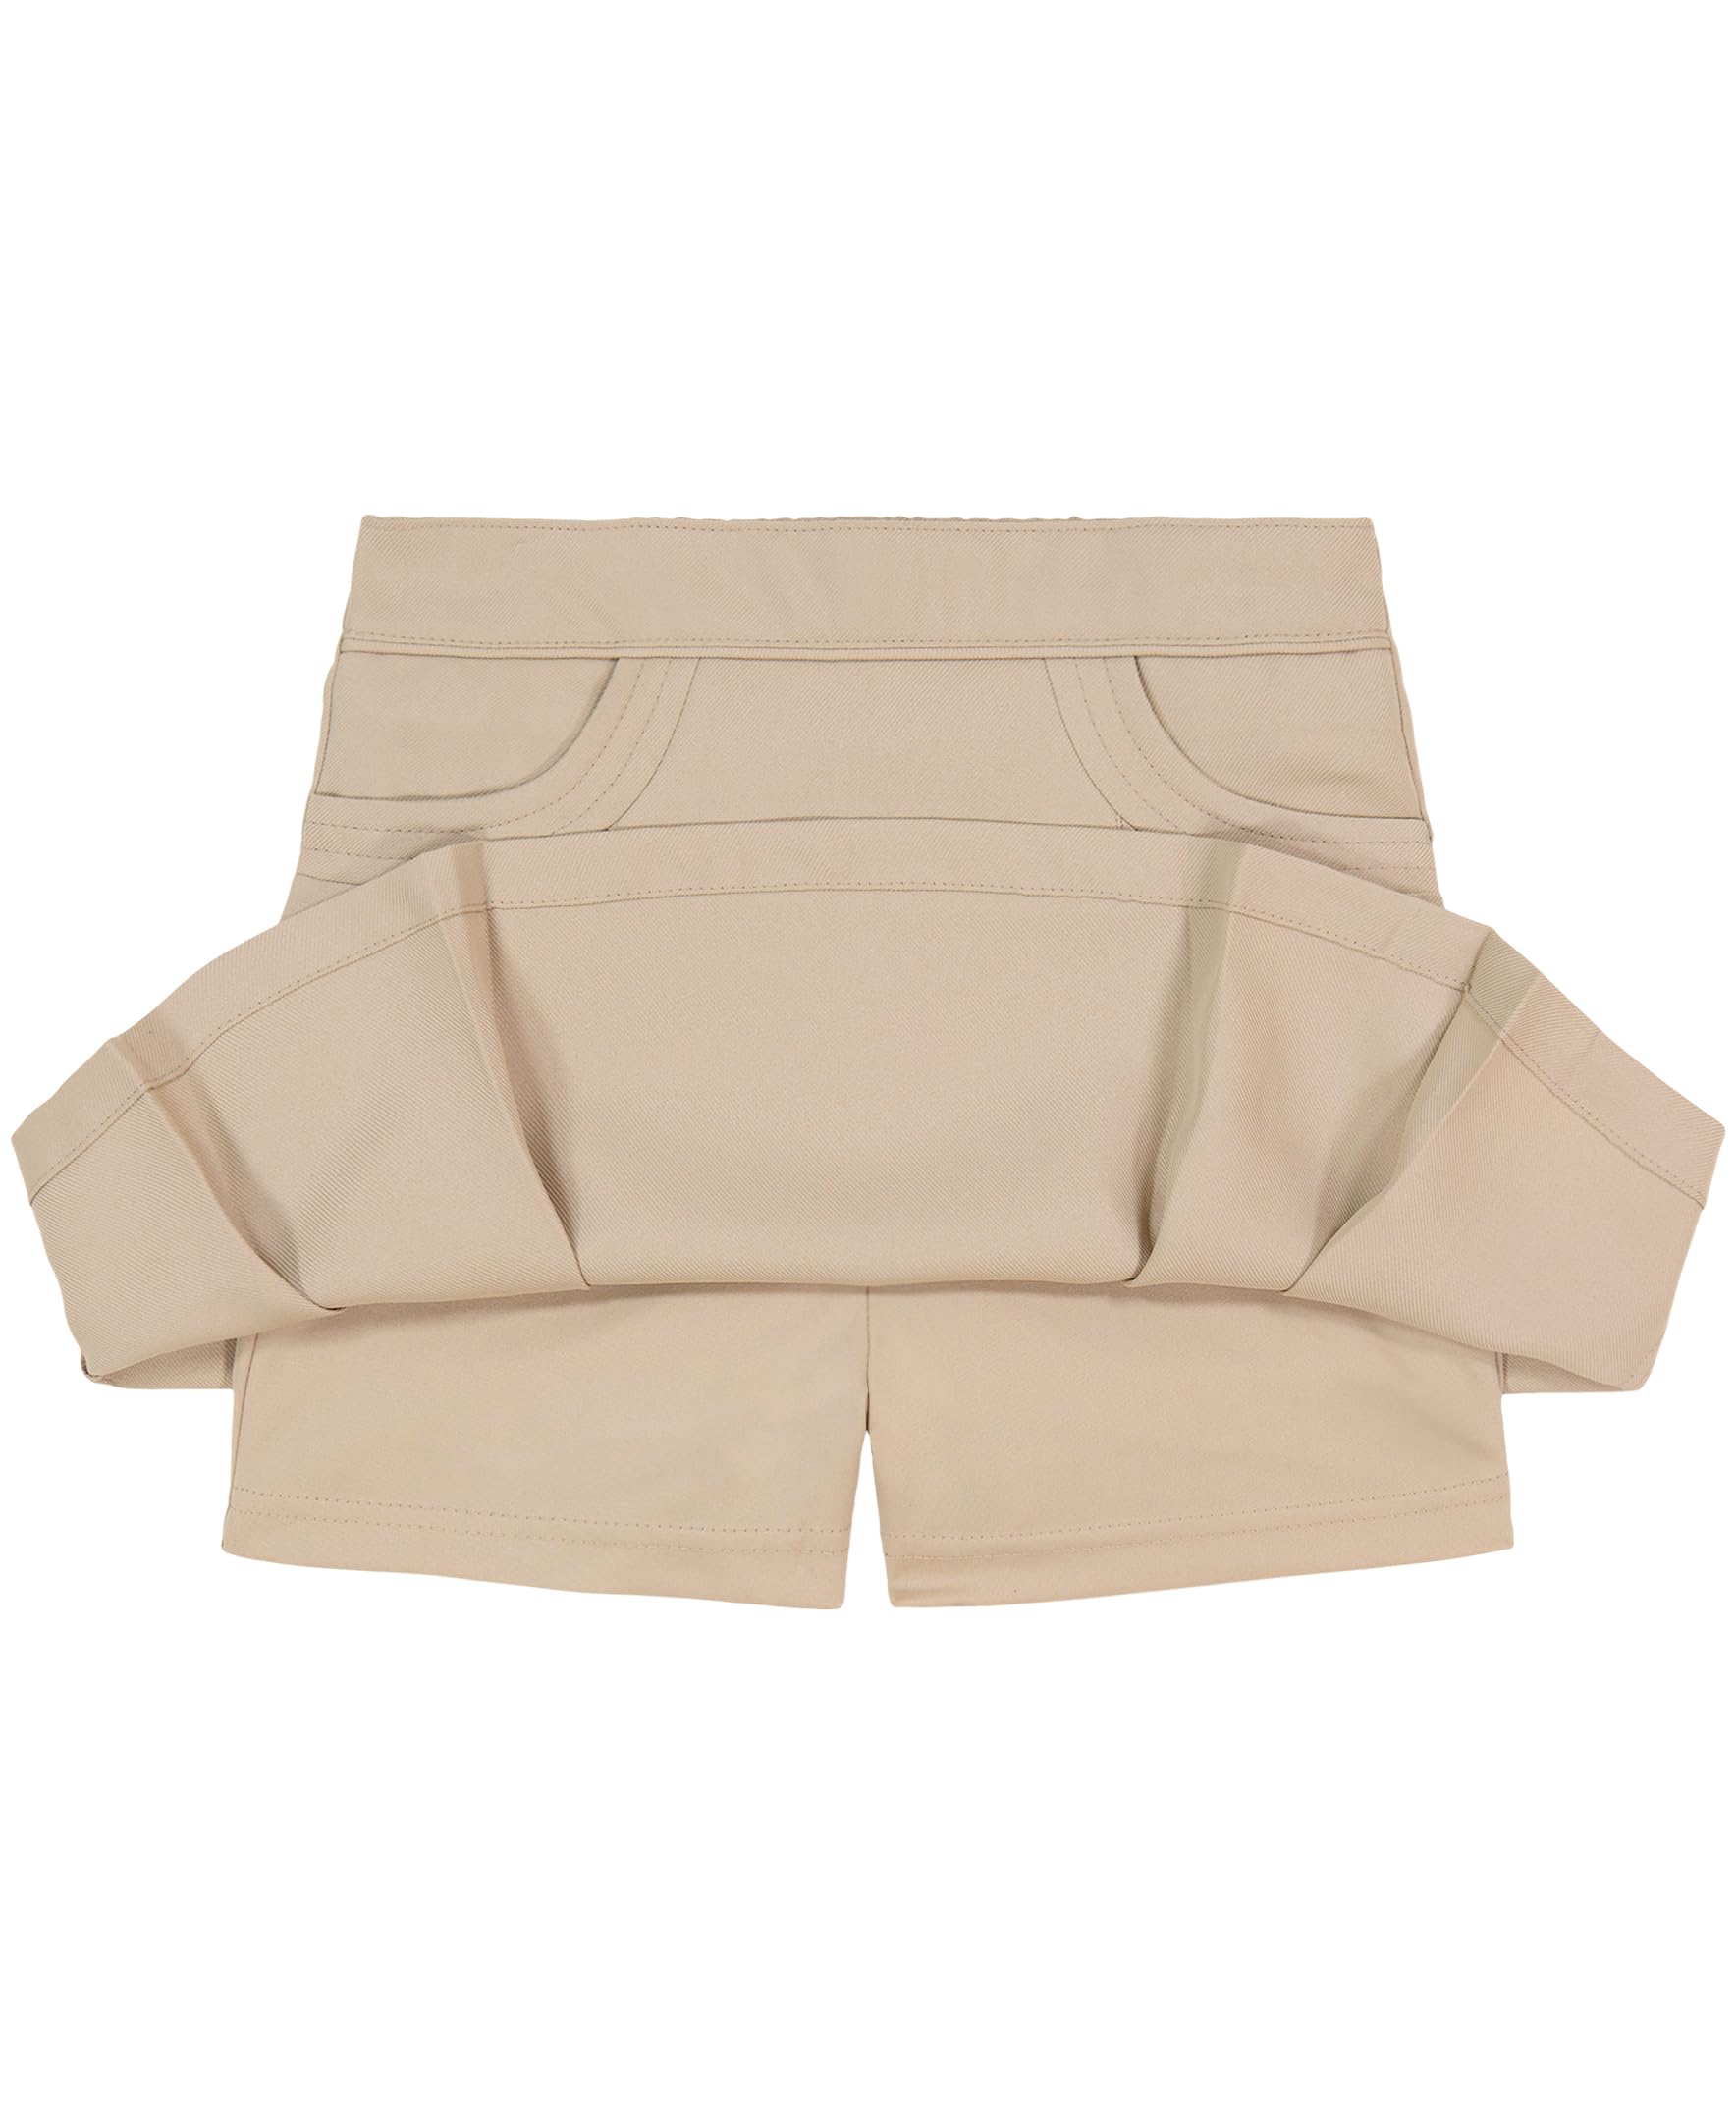 Nautica Girls' School Uniform Pleated Pull-on Scooter Skirt with Undershorts, Knit Waistband & Functional Pockets